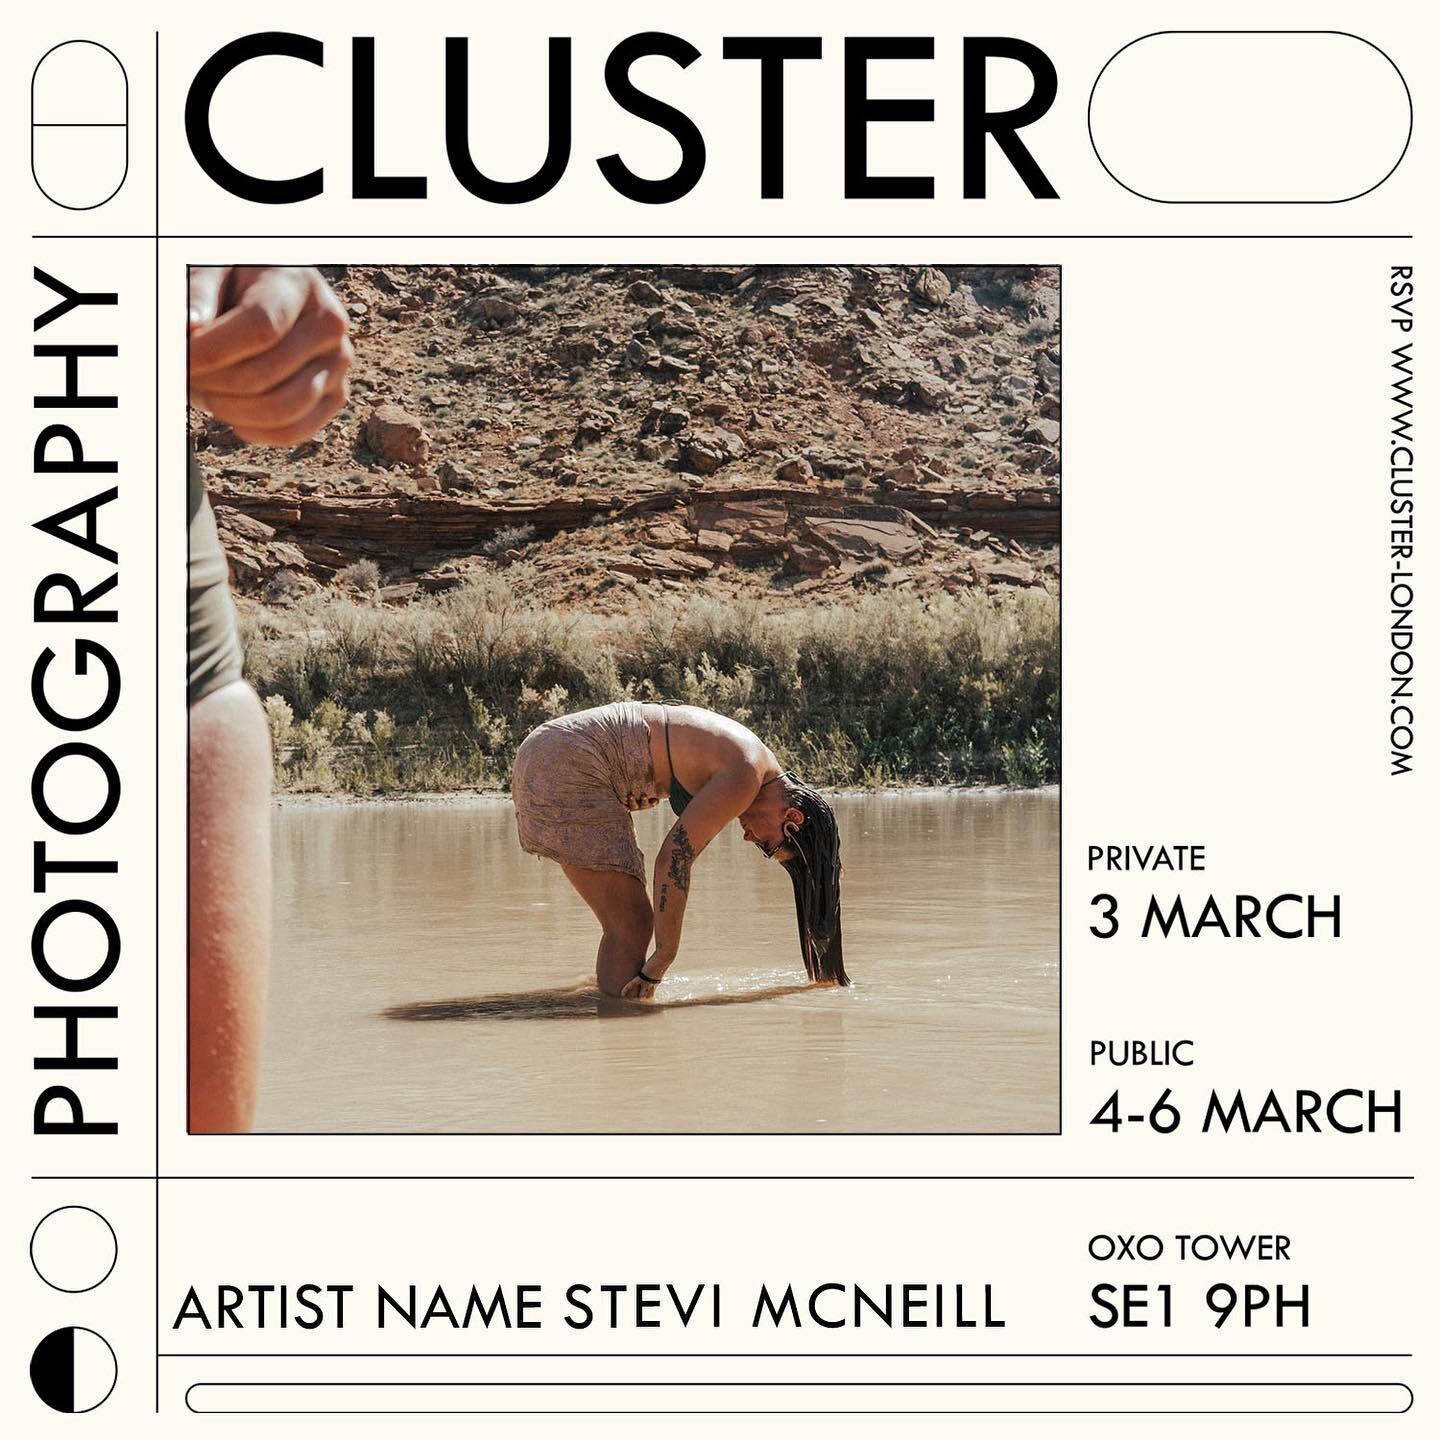 So very excited to be a part of the exhibition with @cluster__photographyandprint  and so many other talented creators at the @oxotowerwharf 
My UK people if you are around and wanting to venture out for a lovely day of art my work will be there! 

I